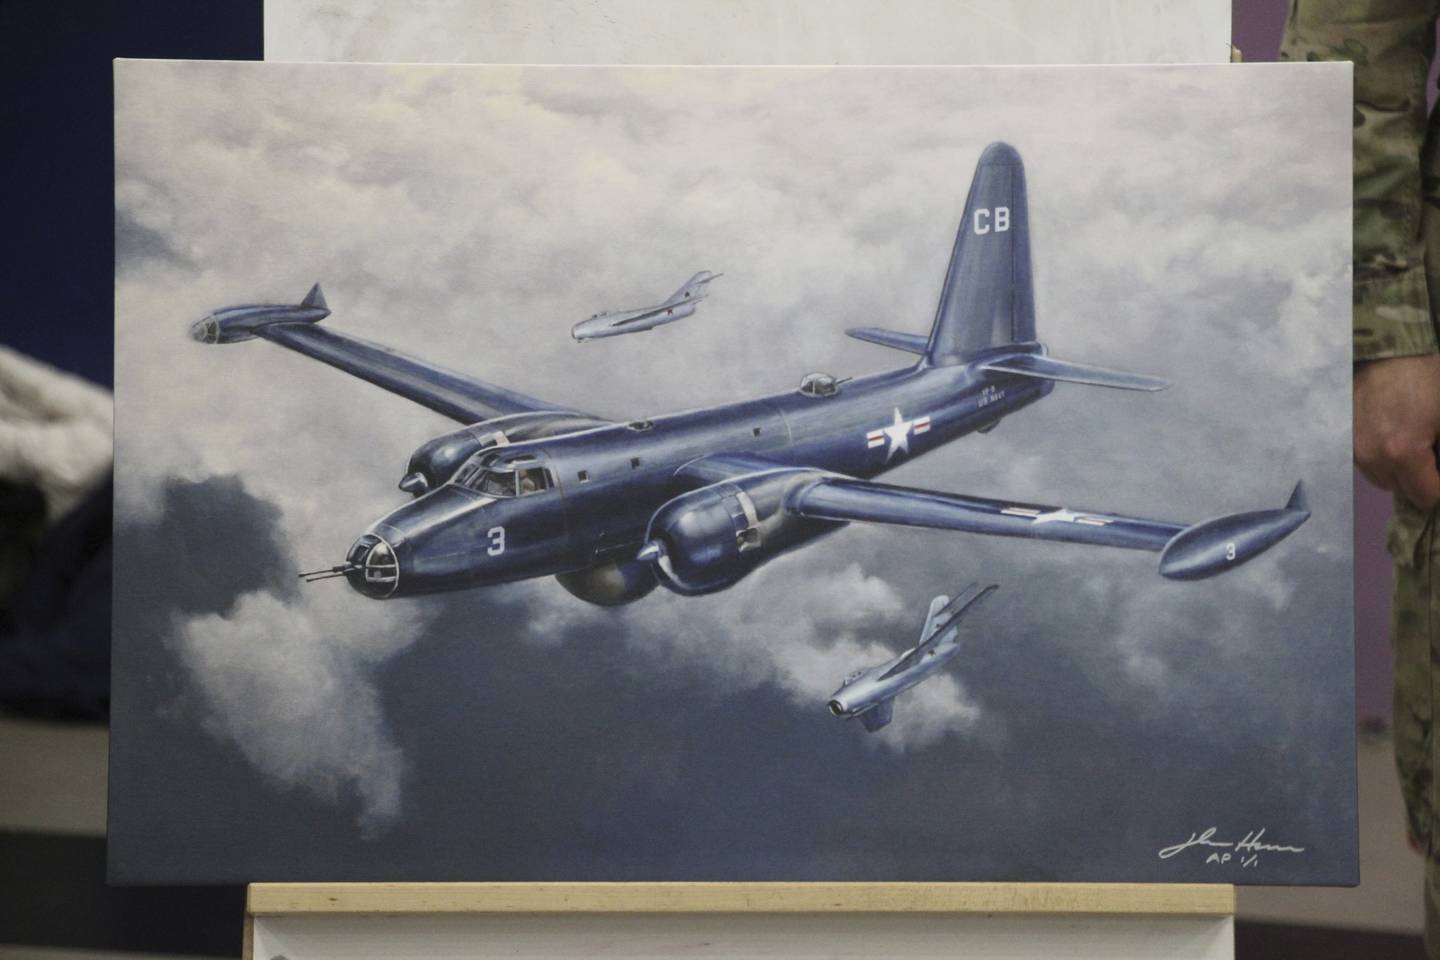 This March 28, 2023, photo shows a depiction by artist John Hume of the Navy Neptune that was shot down by Soviet MiG-15s on June 22, 1955, as displayed in Gambell, Alaska.